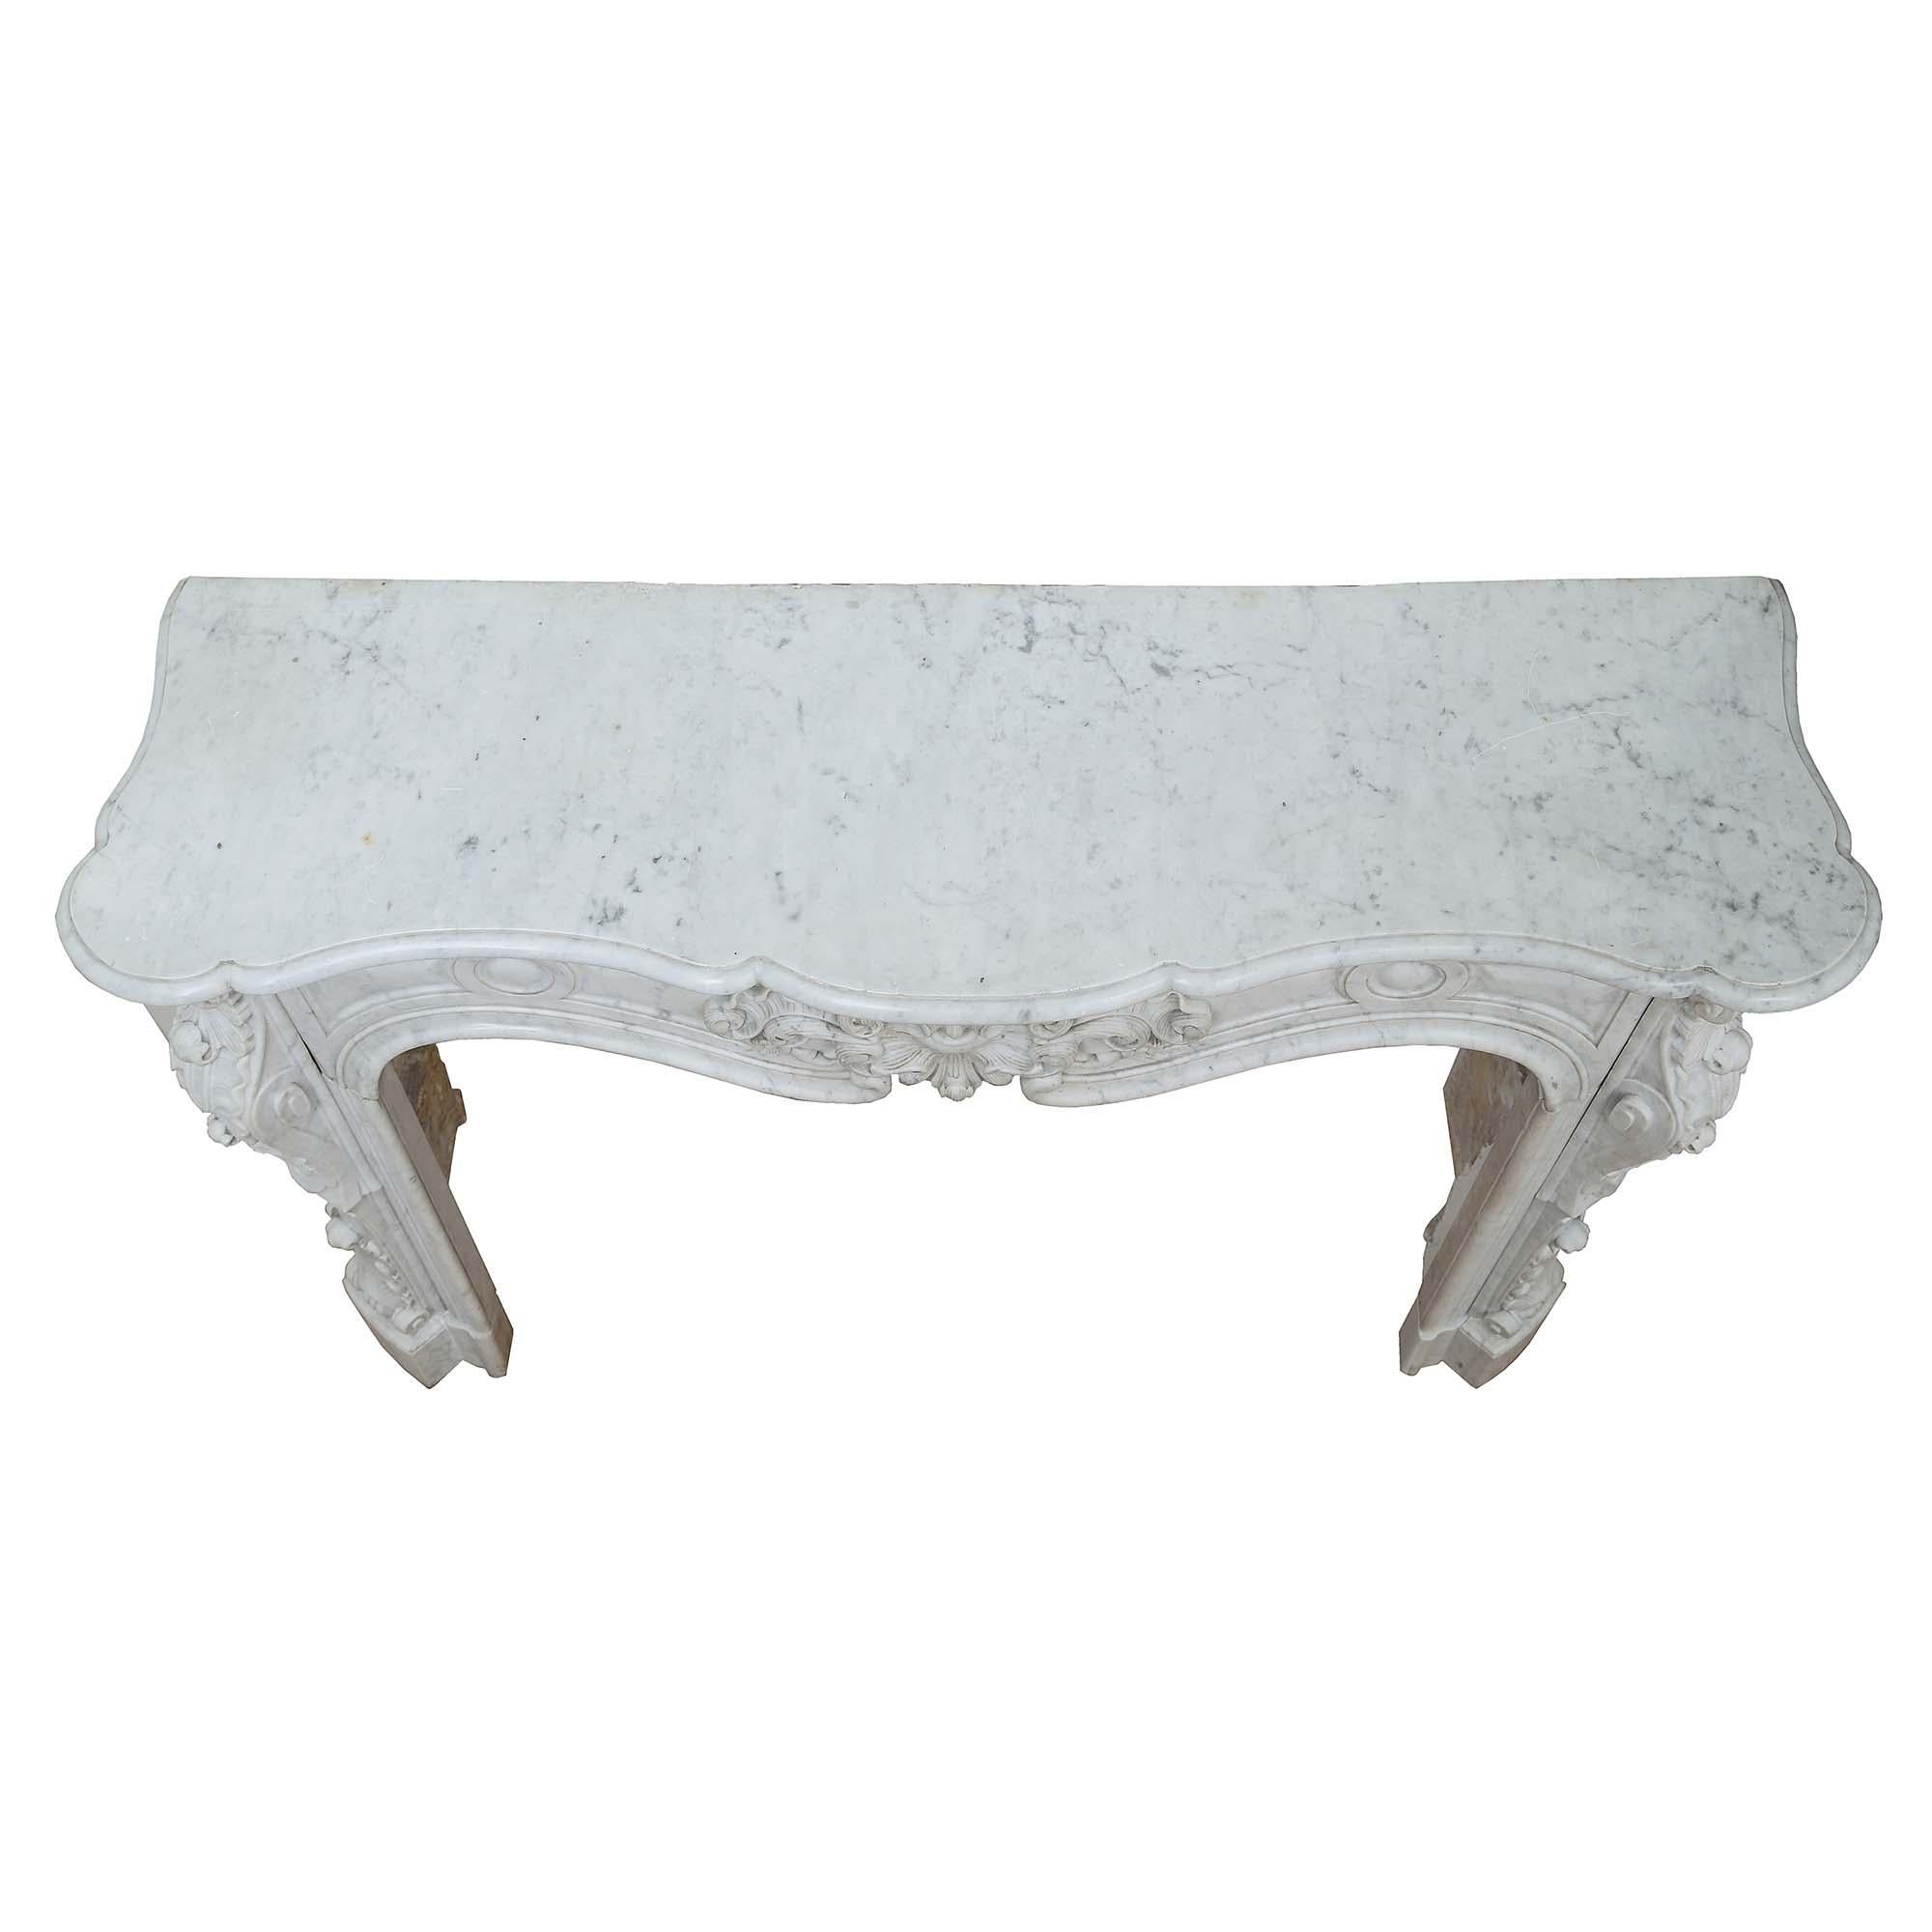 A magnificent French 19th century Louis XV st. white Carrara marble mantel. This exquisitely carved mantel is raised by volute jambs with rich carvings of large acanthus leaves and scrolls. The arbalest shaped frieze has an extremely well carved